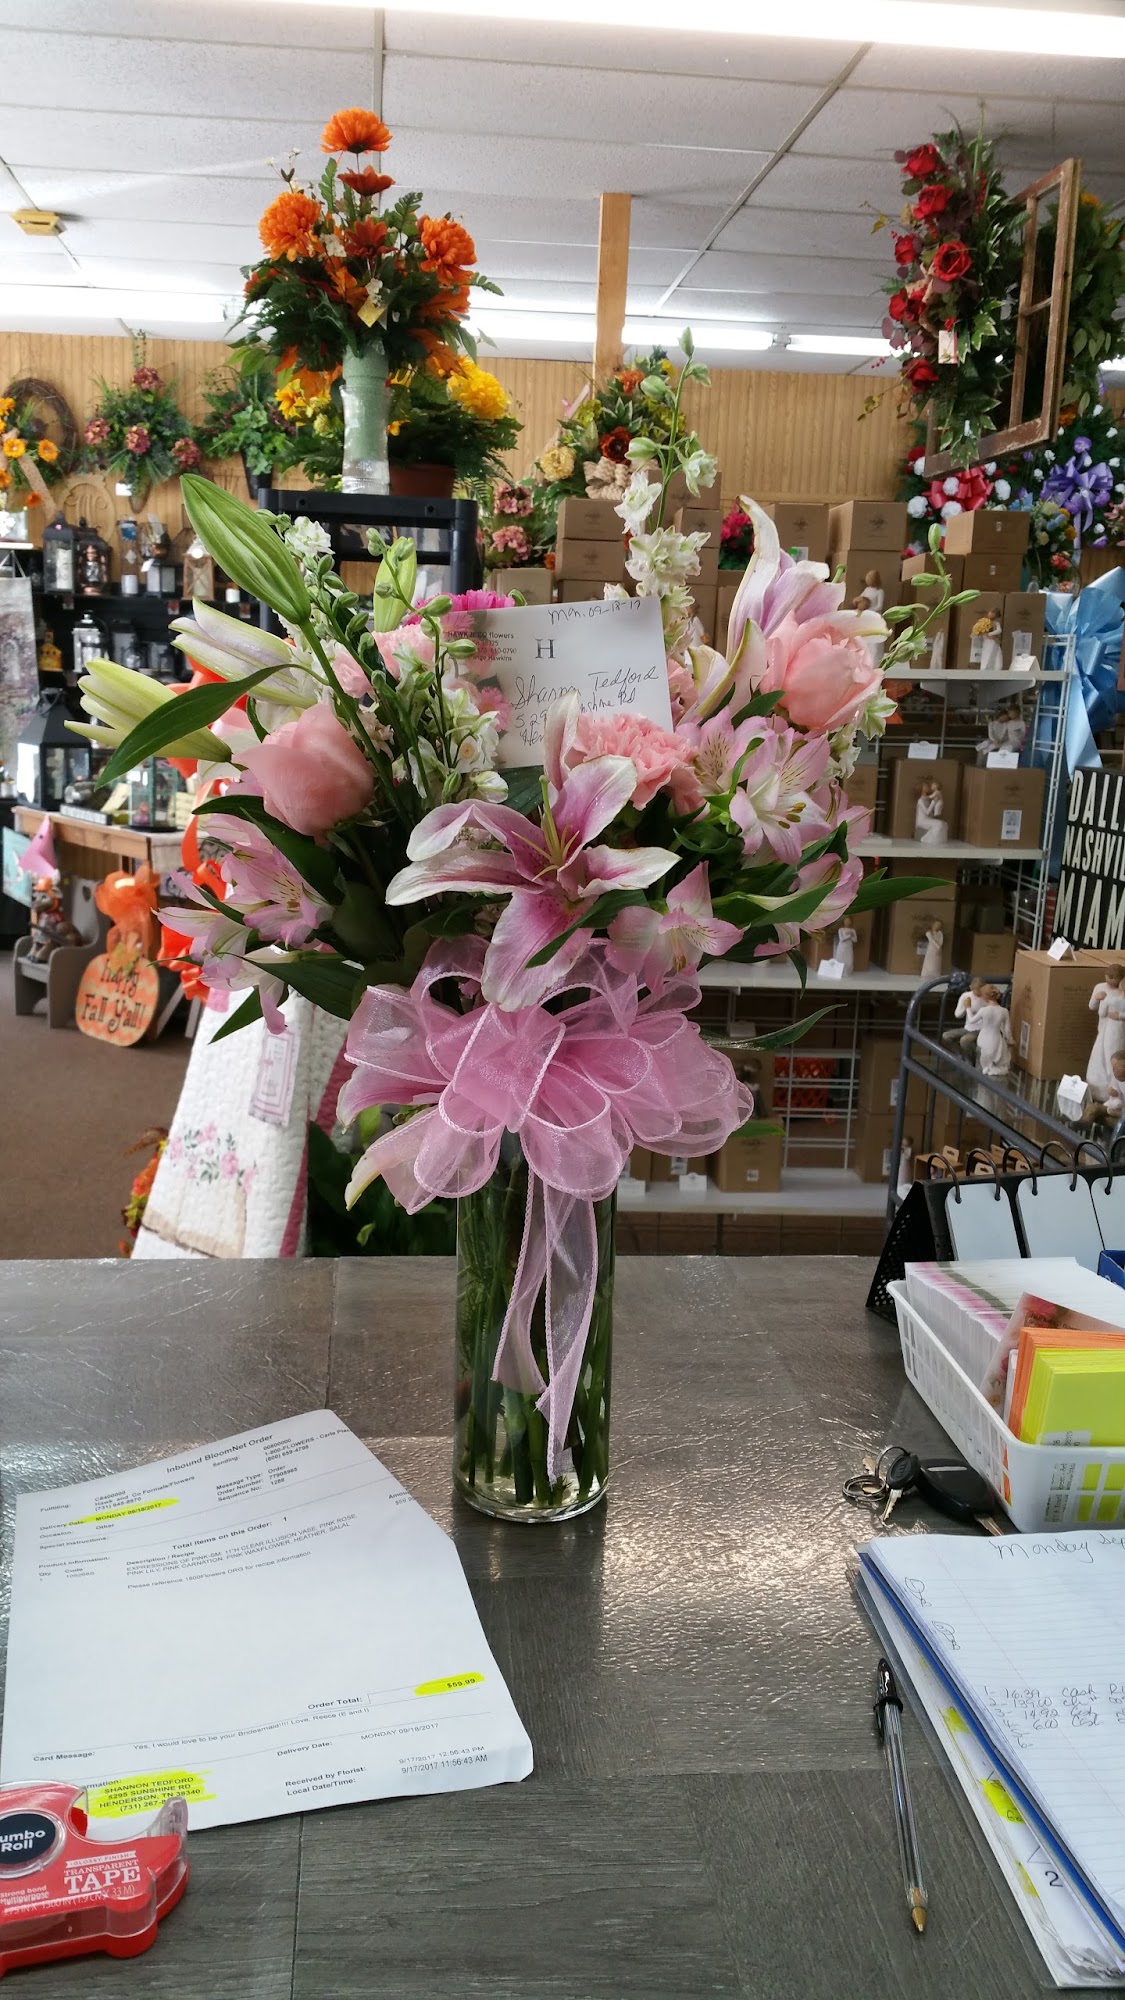 Hawk & Co Flowers 119 S 2nd St, Selmer Tennessee 38375